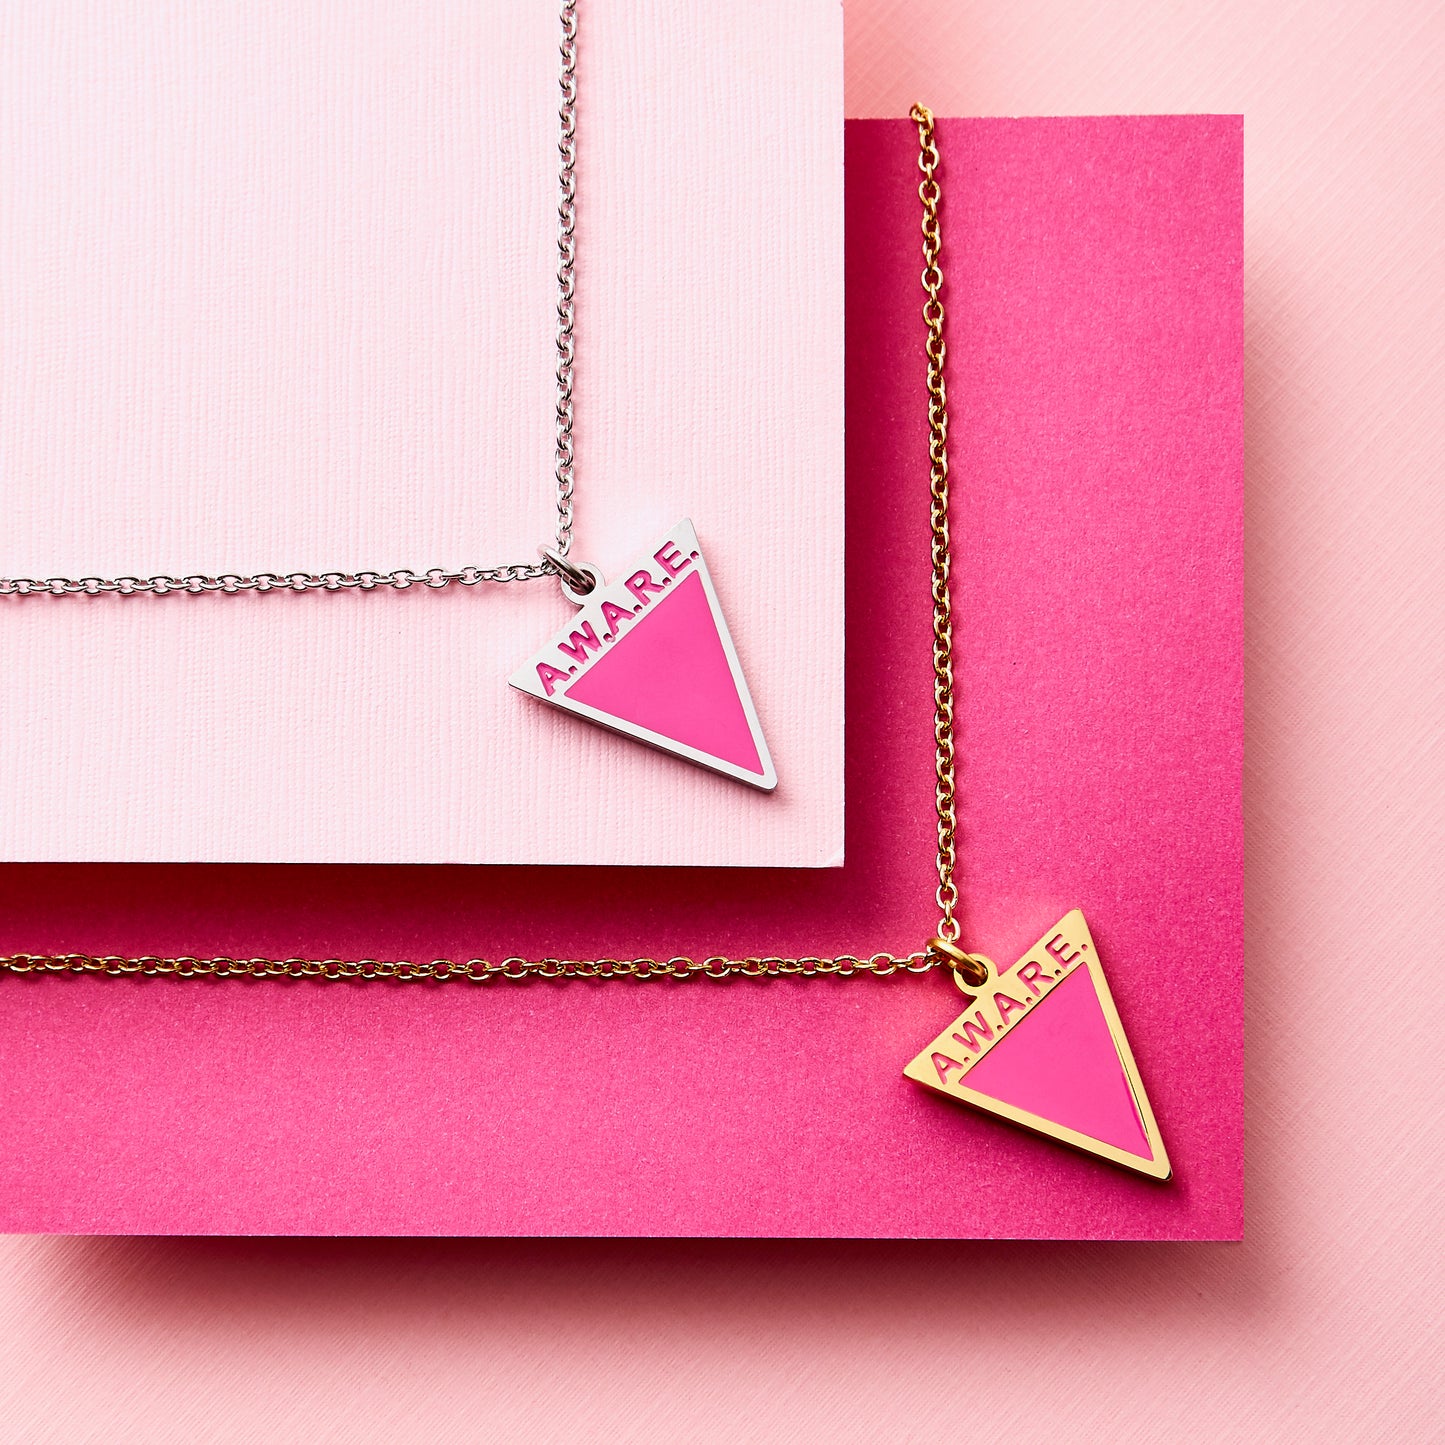 Pink Aware Necklaces